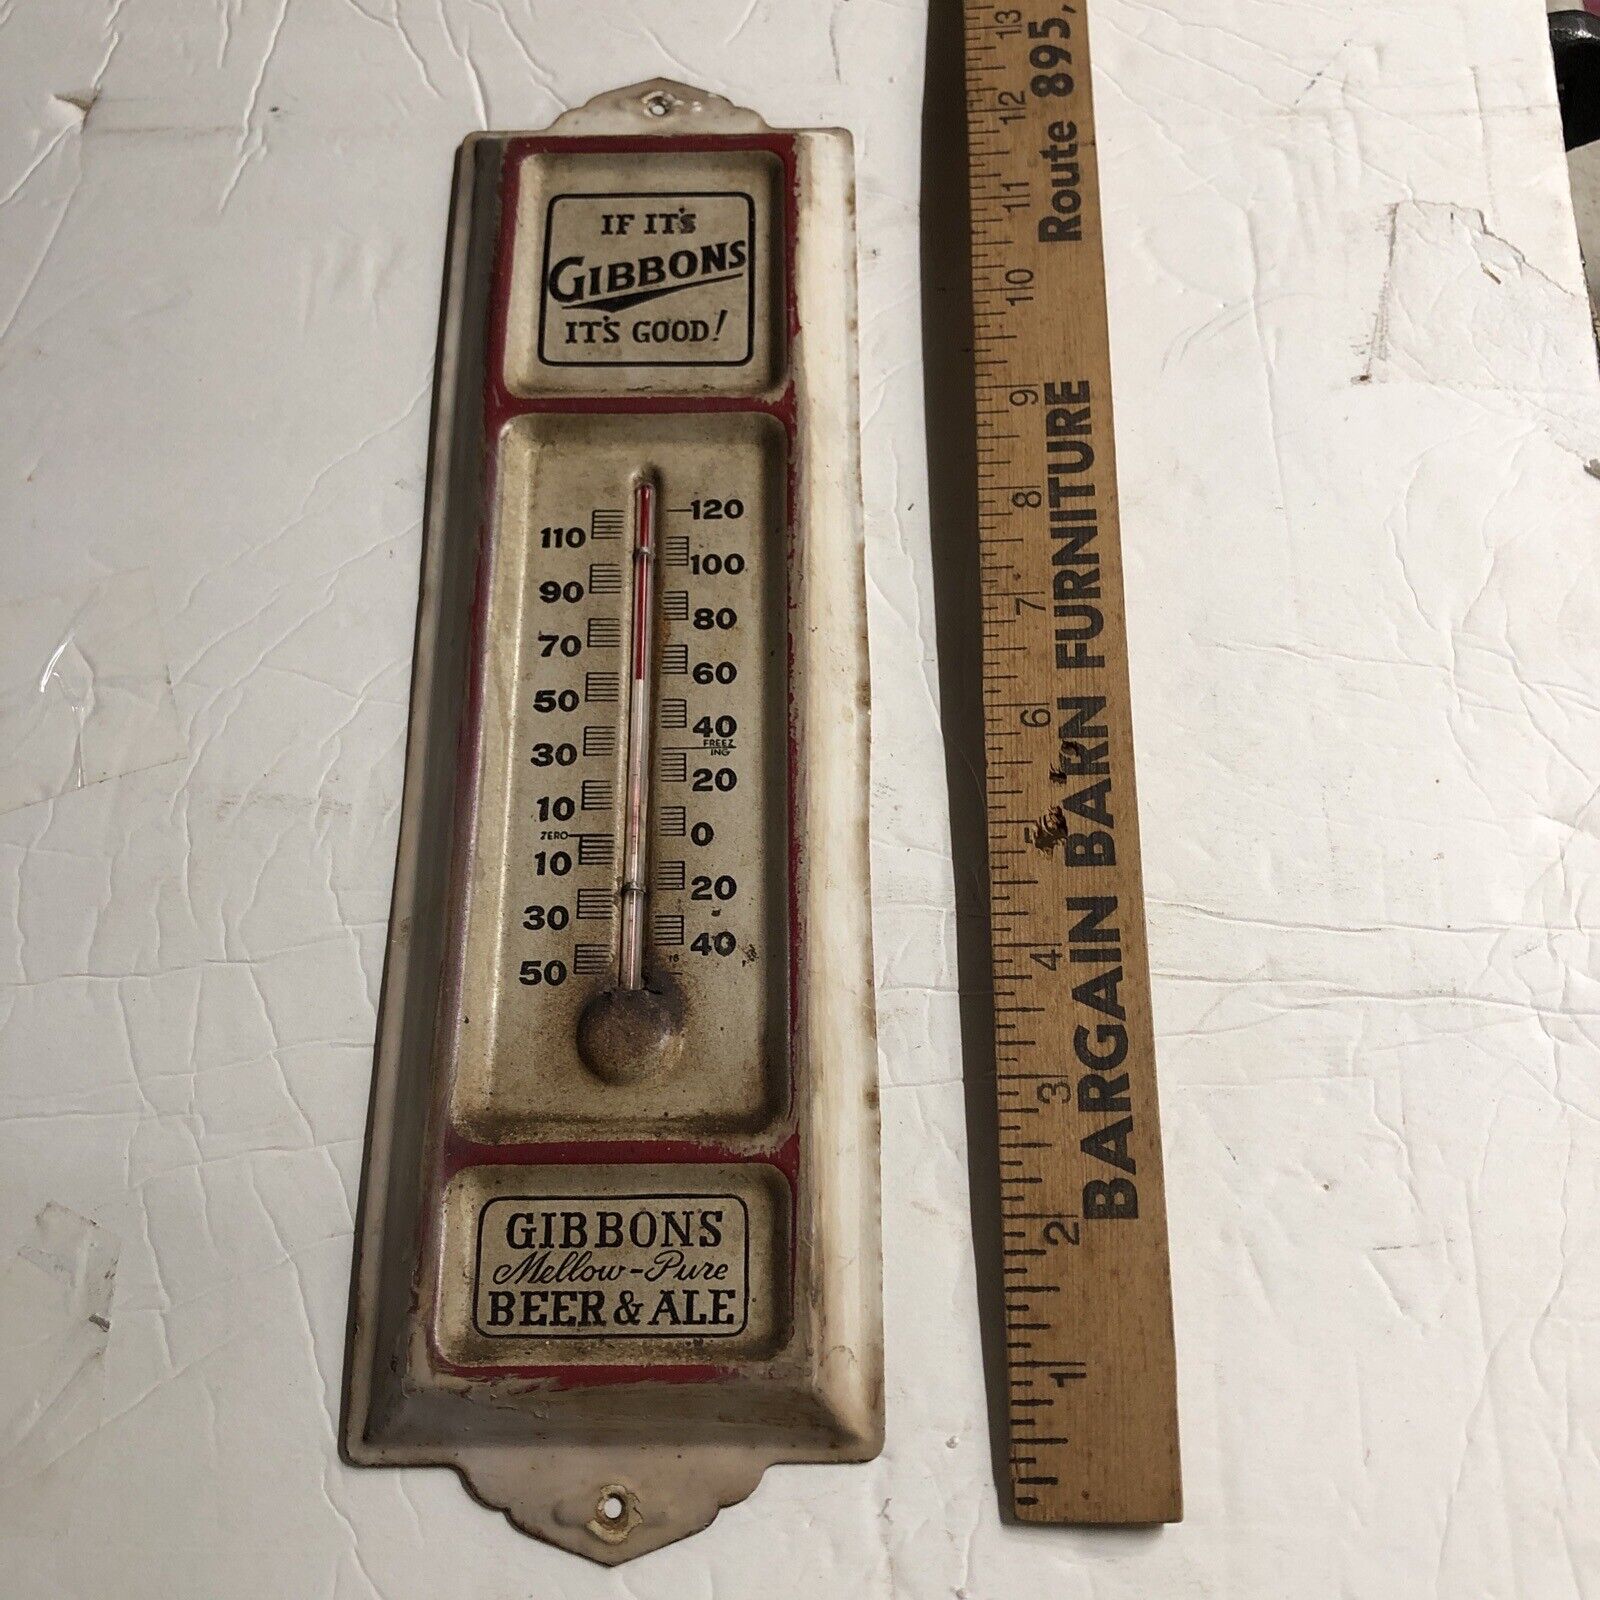 Vintage Gibbons Mellow Pure Beer & Ale Thermometer advertising